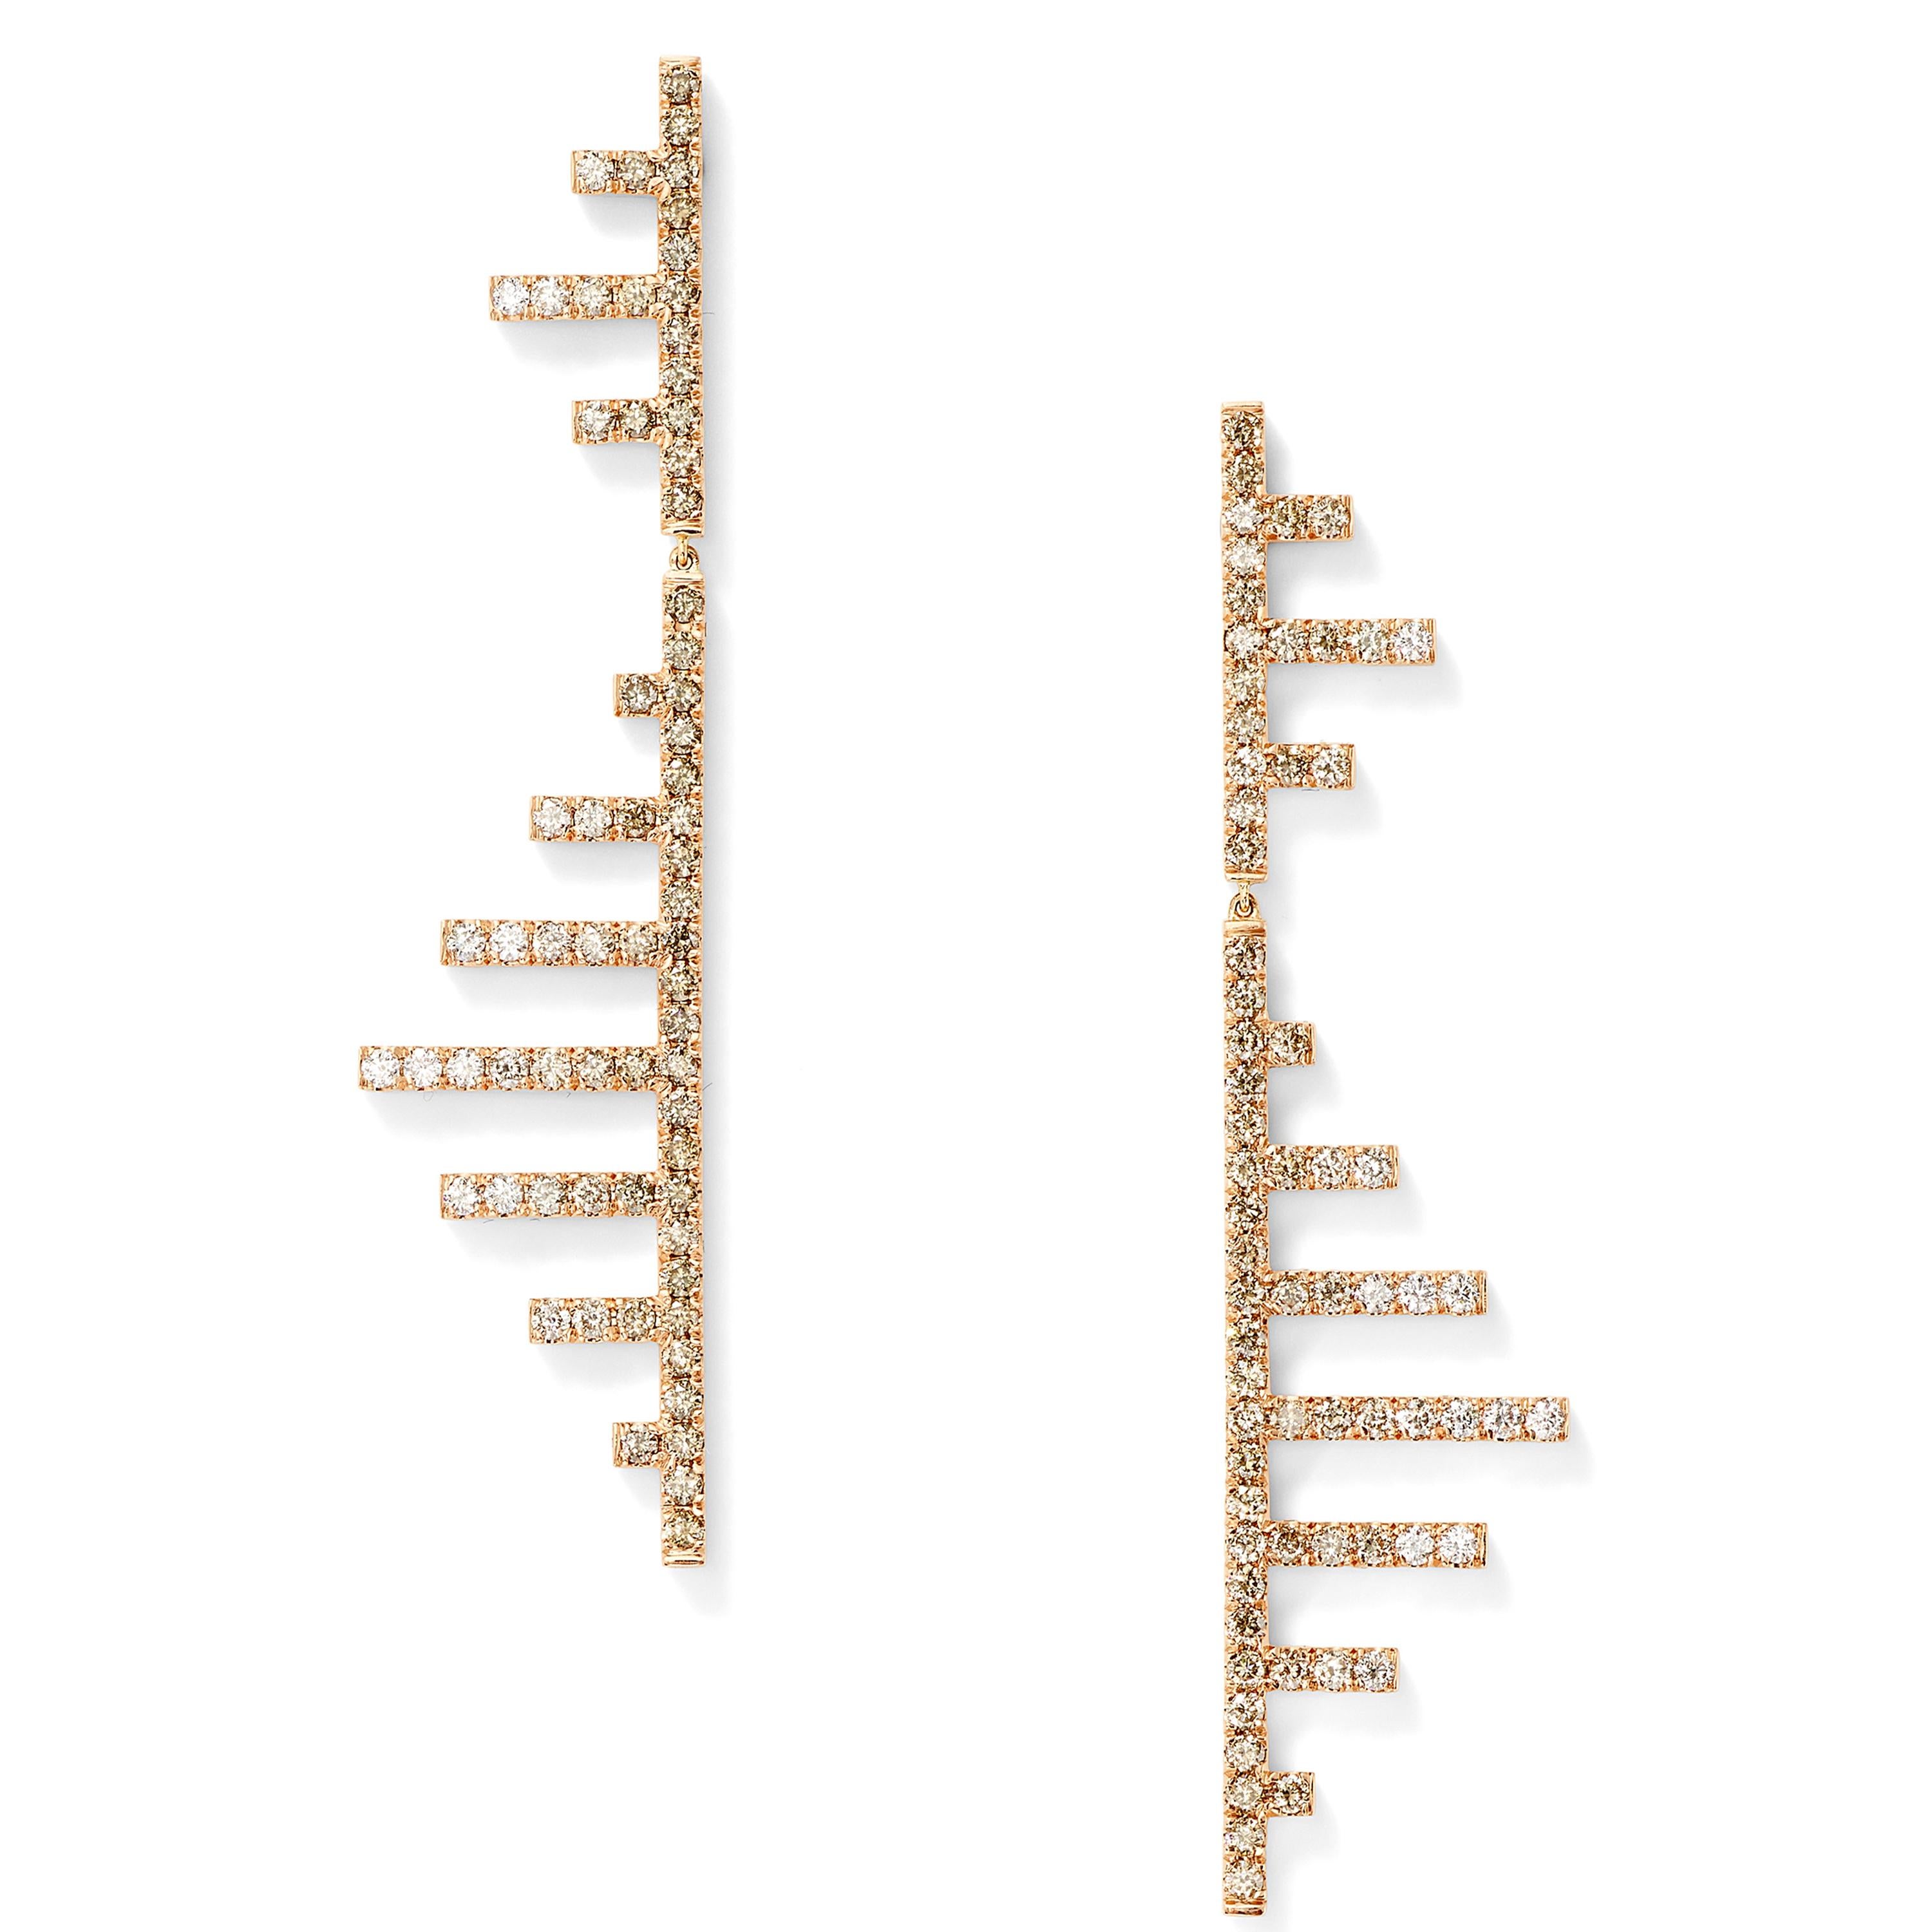 18k Rose Gold with 2.68ct of Australian Champagne Diamonds. 

The Axis Earrings are made of Argyle diamonds from the Australian mine, supporting sustainable and ethical mining practices. The earrings feature an ombré effect using a natural golden